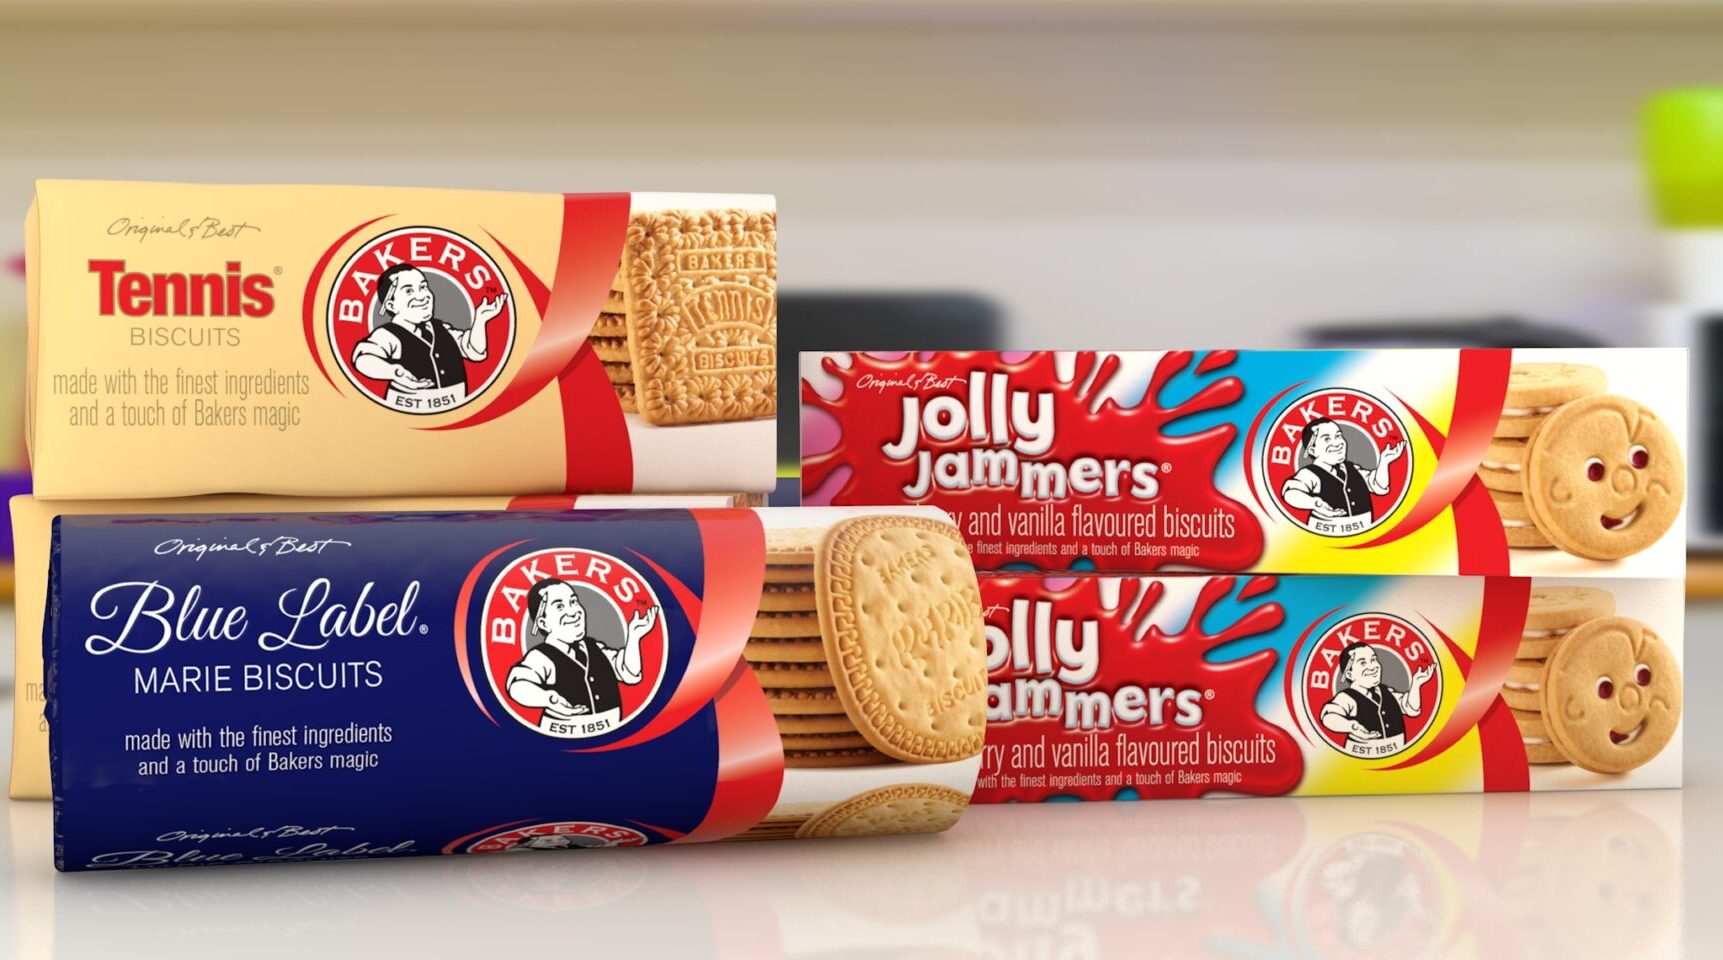 Jolly Jammers - Bakers - Berge Farrell Design